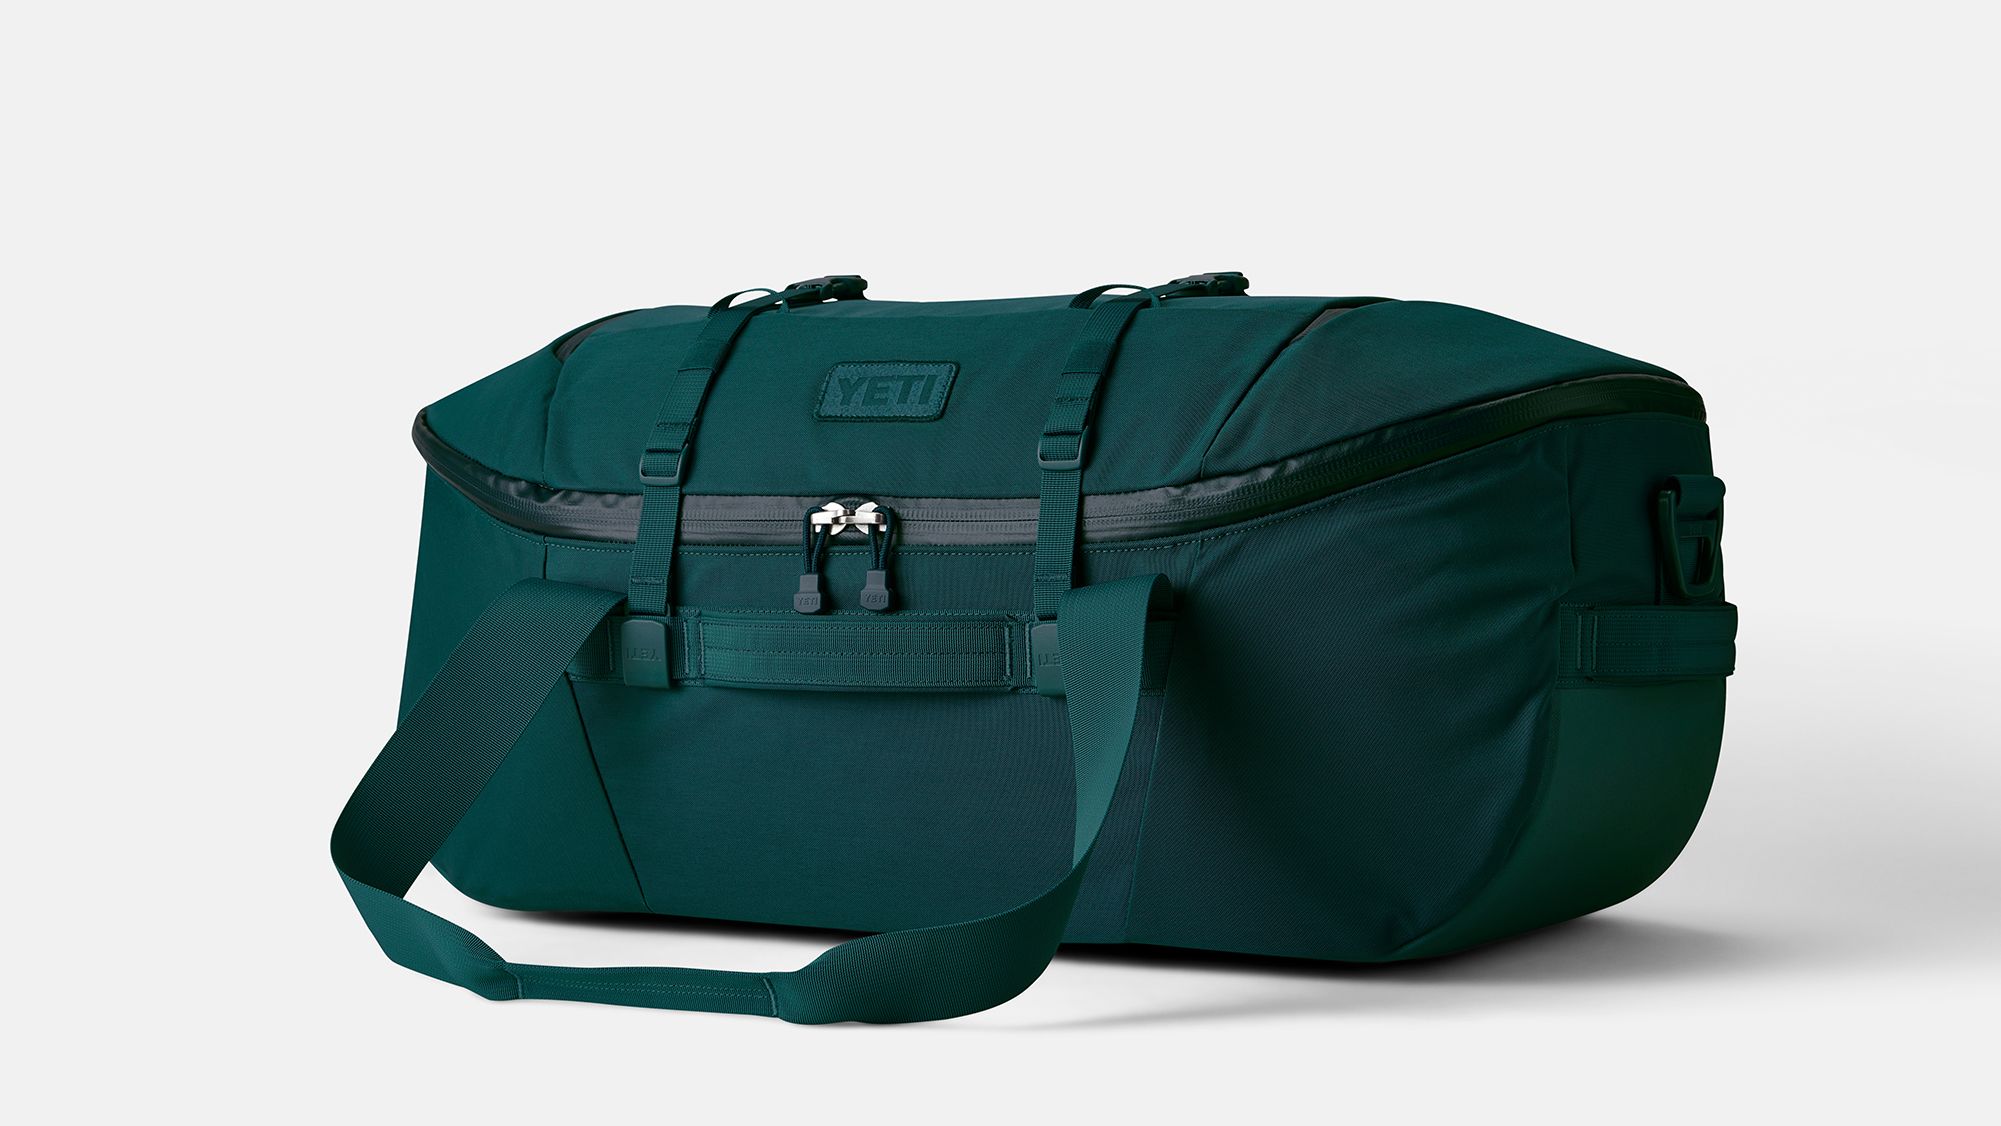 Yeti's new bag line is perfect for adventures, everyday use